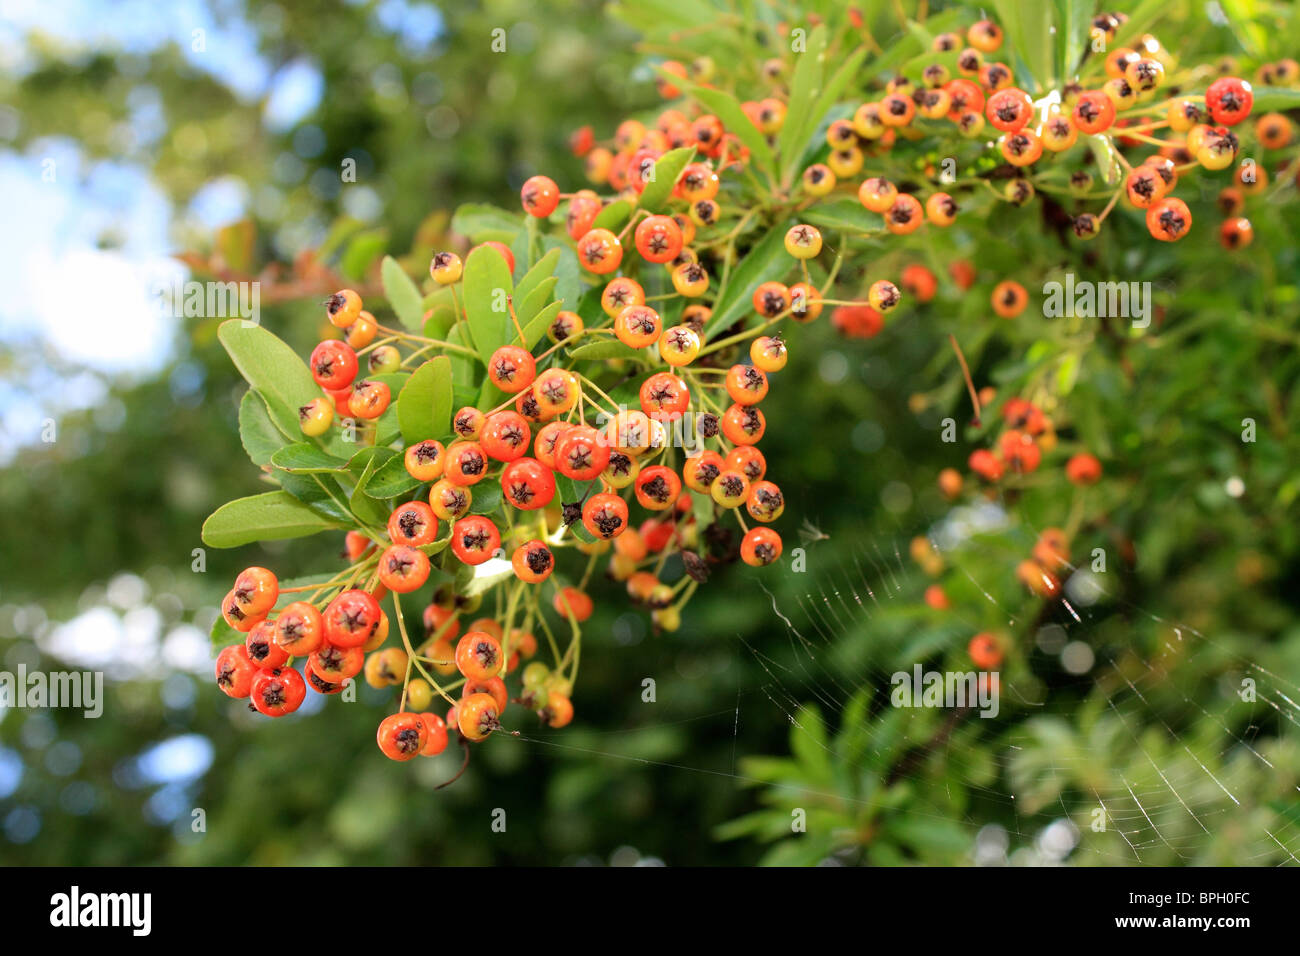 Ripe berries or pomes of the thorny evergreen shrub pyracantha growing in Surrey England UK Stock Photo